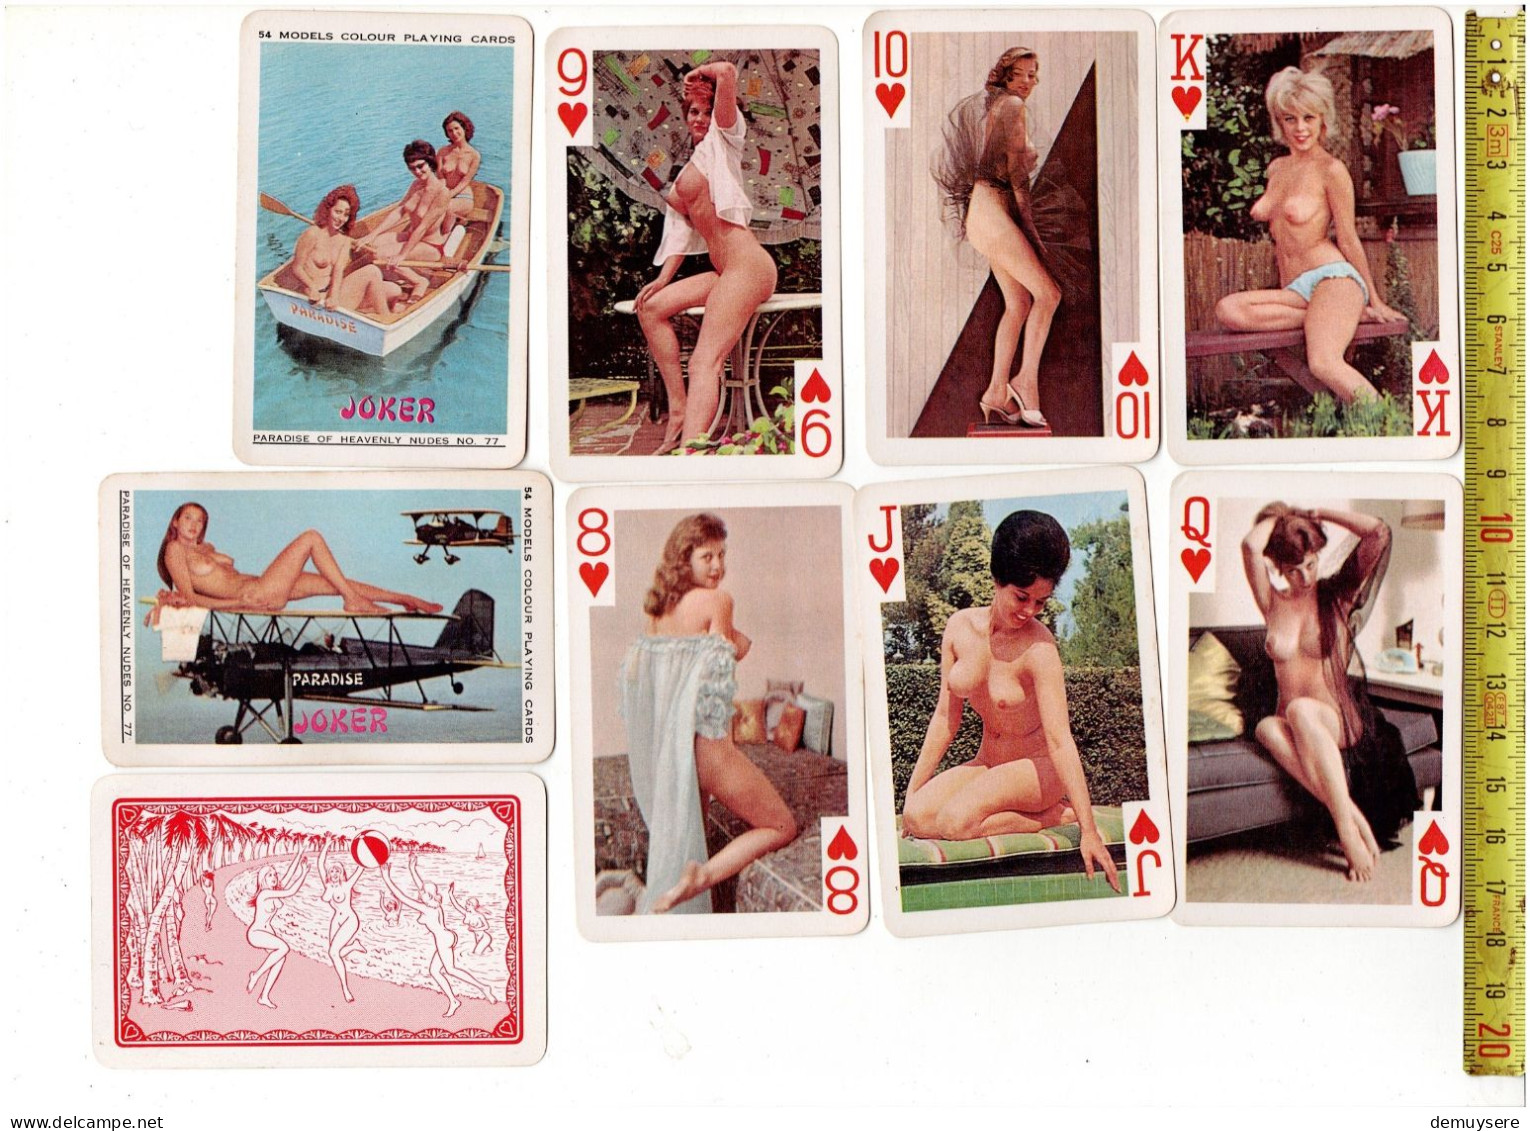 KL 3757 - MODELS COLOUR PLAYING CARDS - PARADISE OF HEAVENLY NUDES NO 77 - Speelkaarten